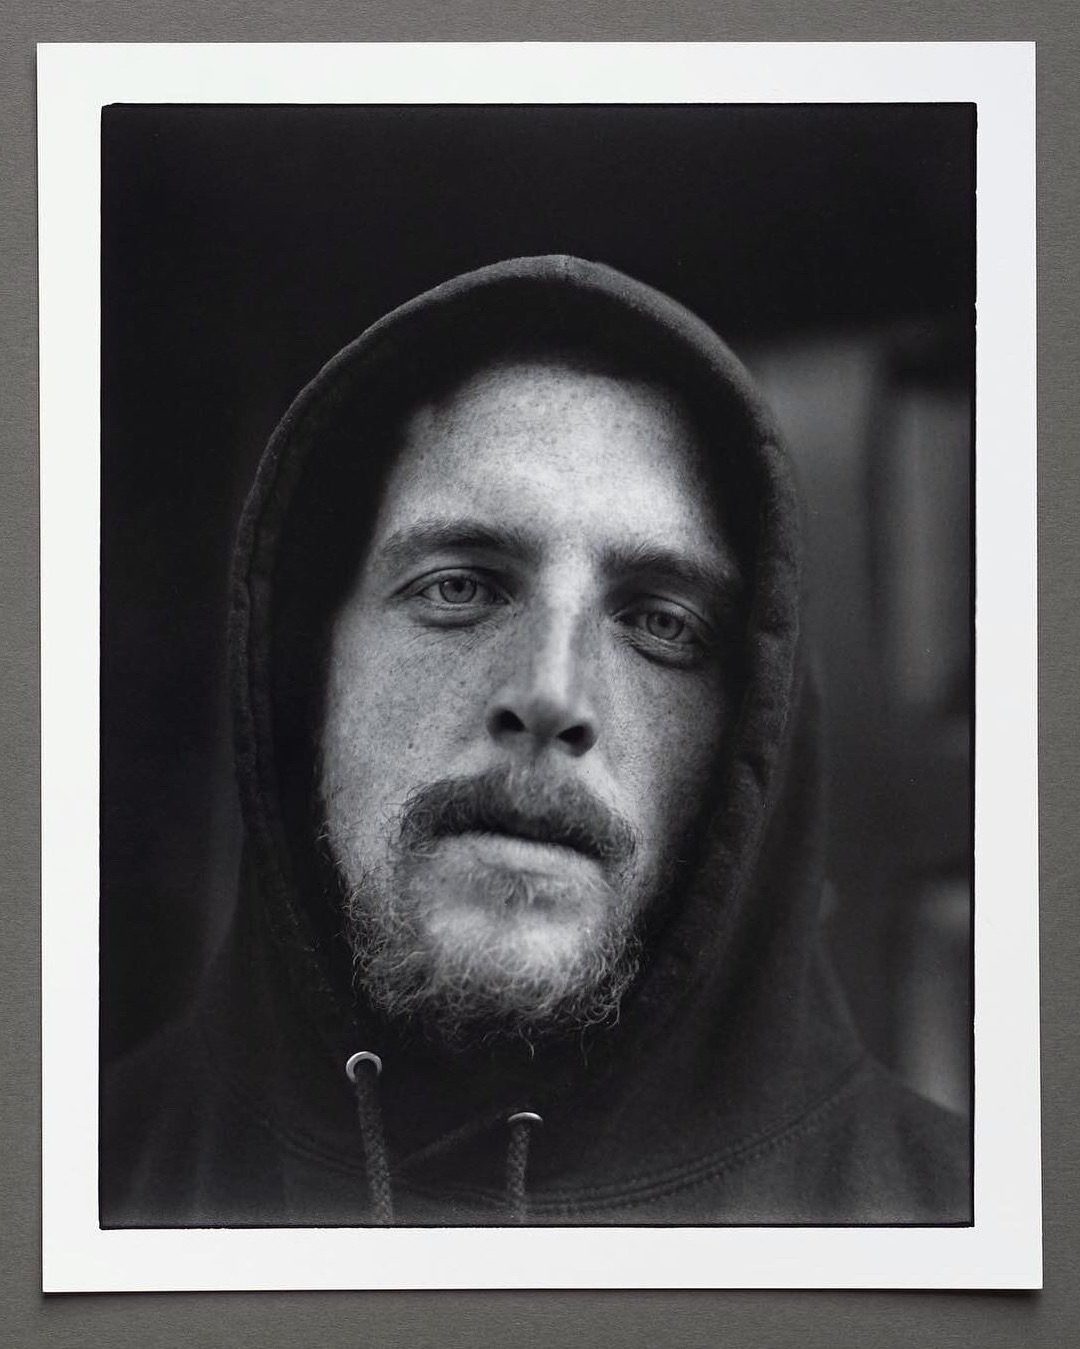 Black and white darkroom print of a portrait of a man with his hood up over his head